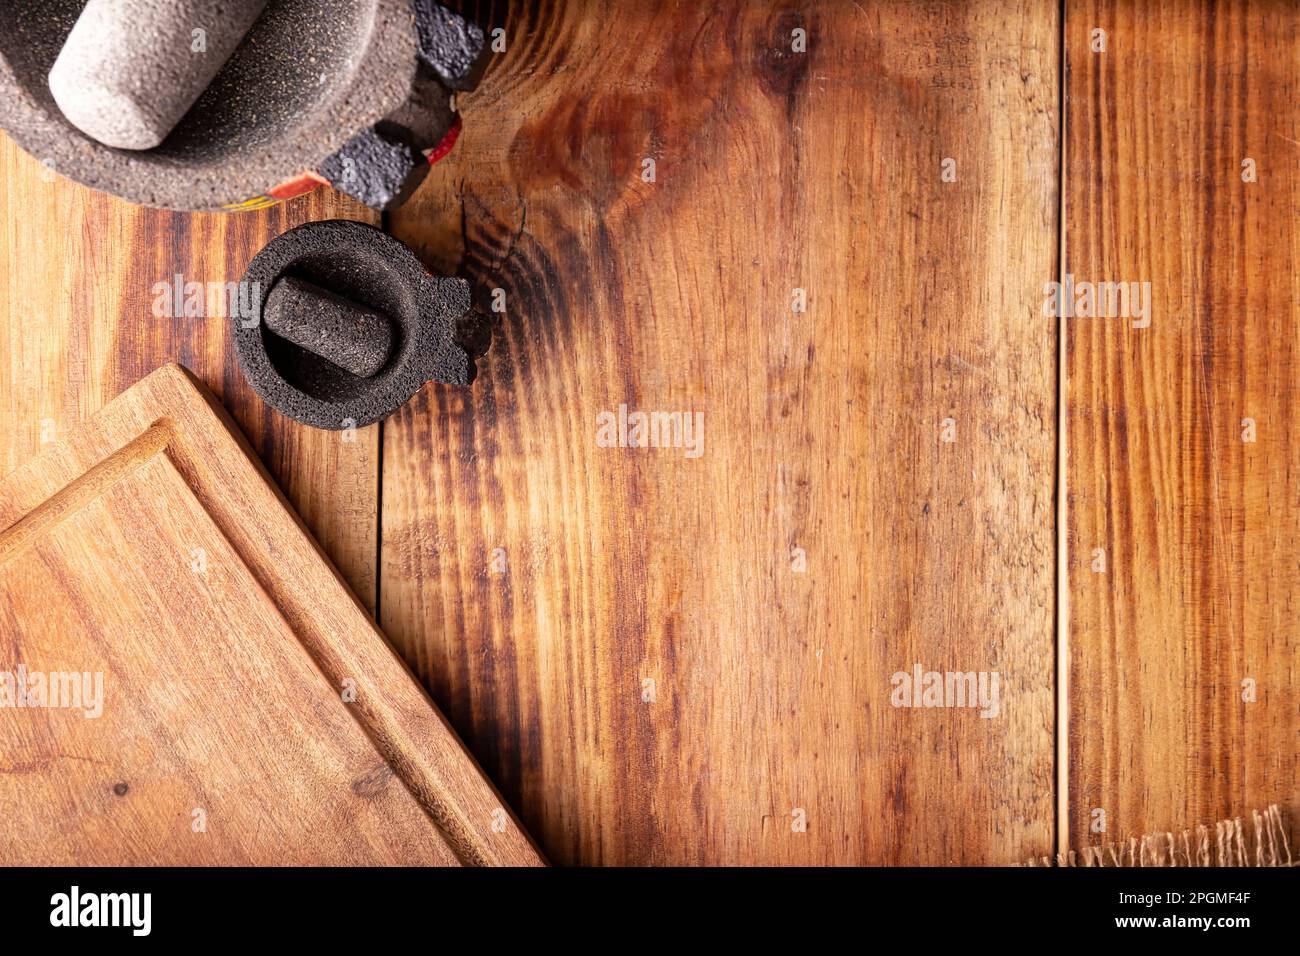 Rustic kitchen concept background. Stone molcajetes and cutting board on rustic wooden table. Table top view. Stock Photo